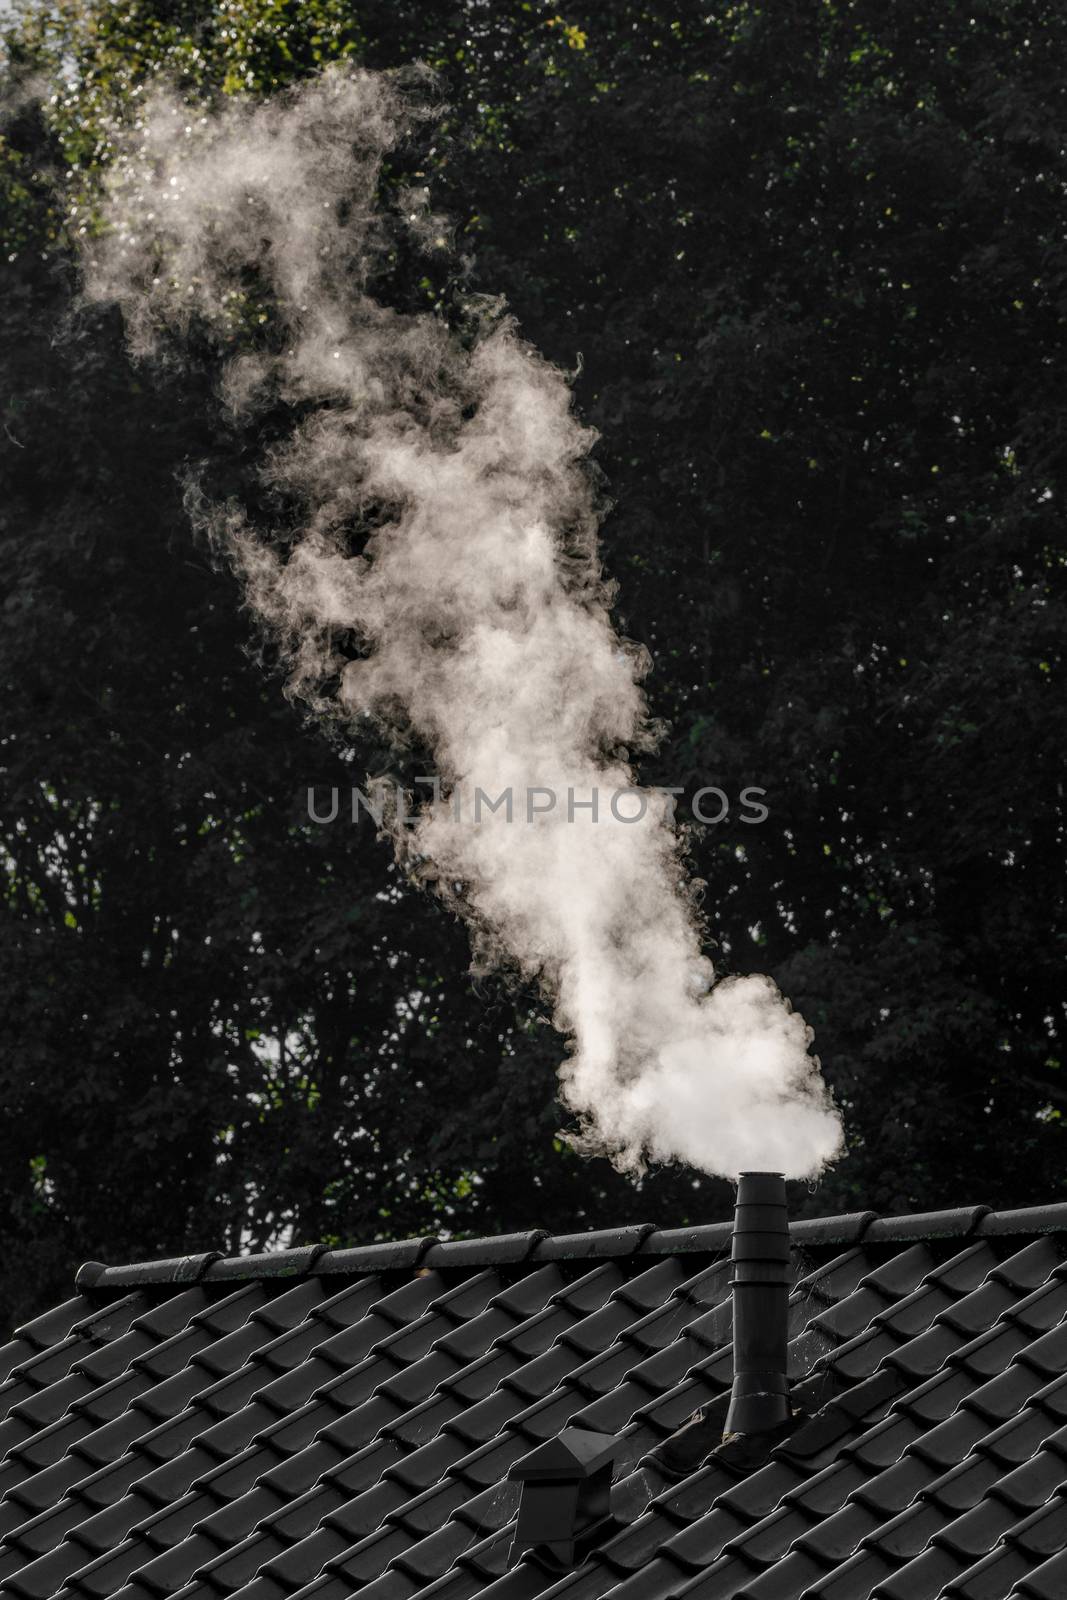 Smoke coming out of a chimney on the roof of a house